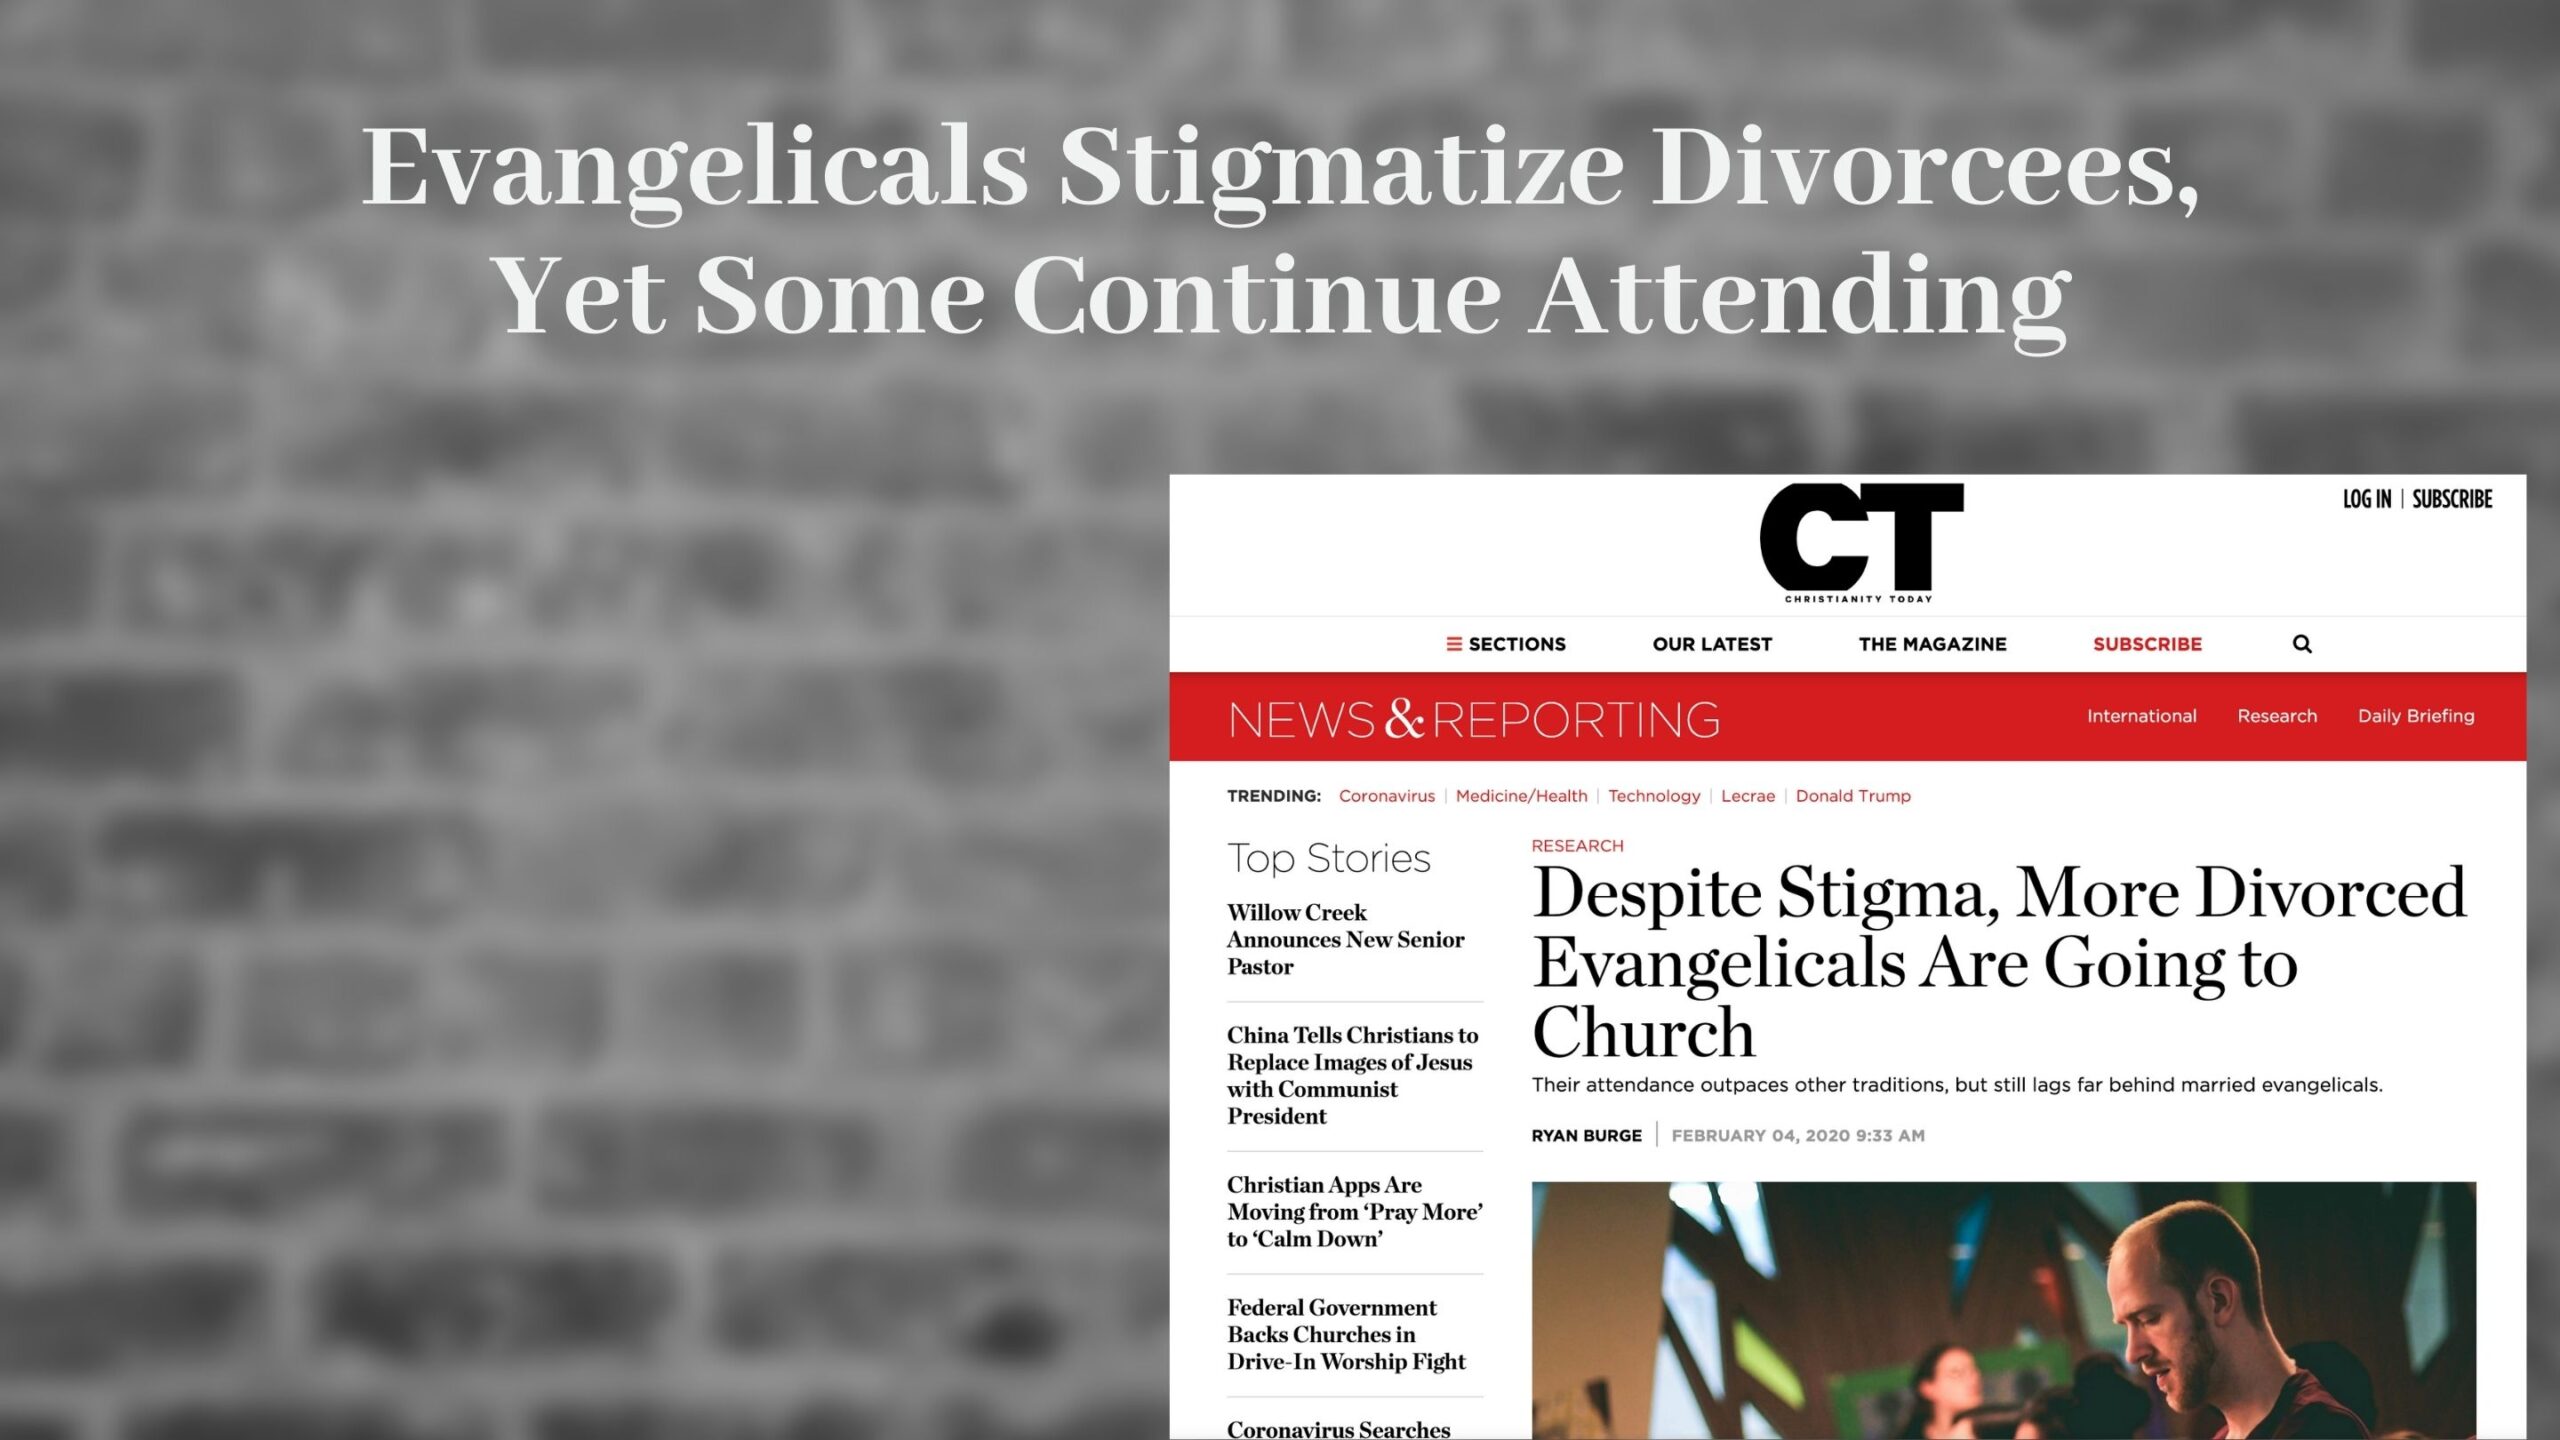 Christianity Today article on the Stigma of Divorce in Evangelical Churches